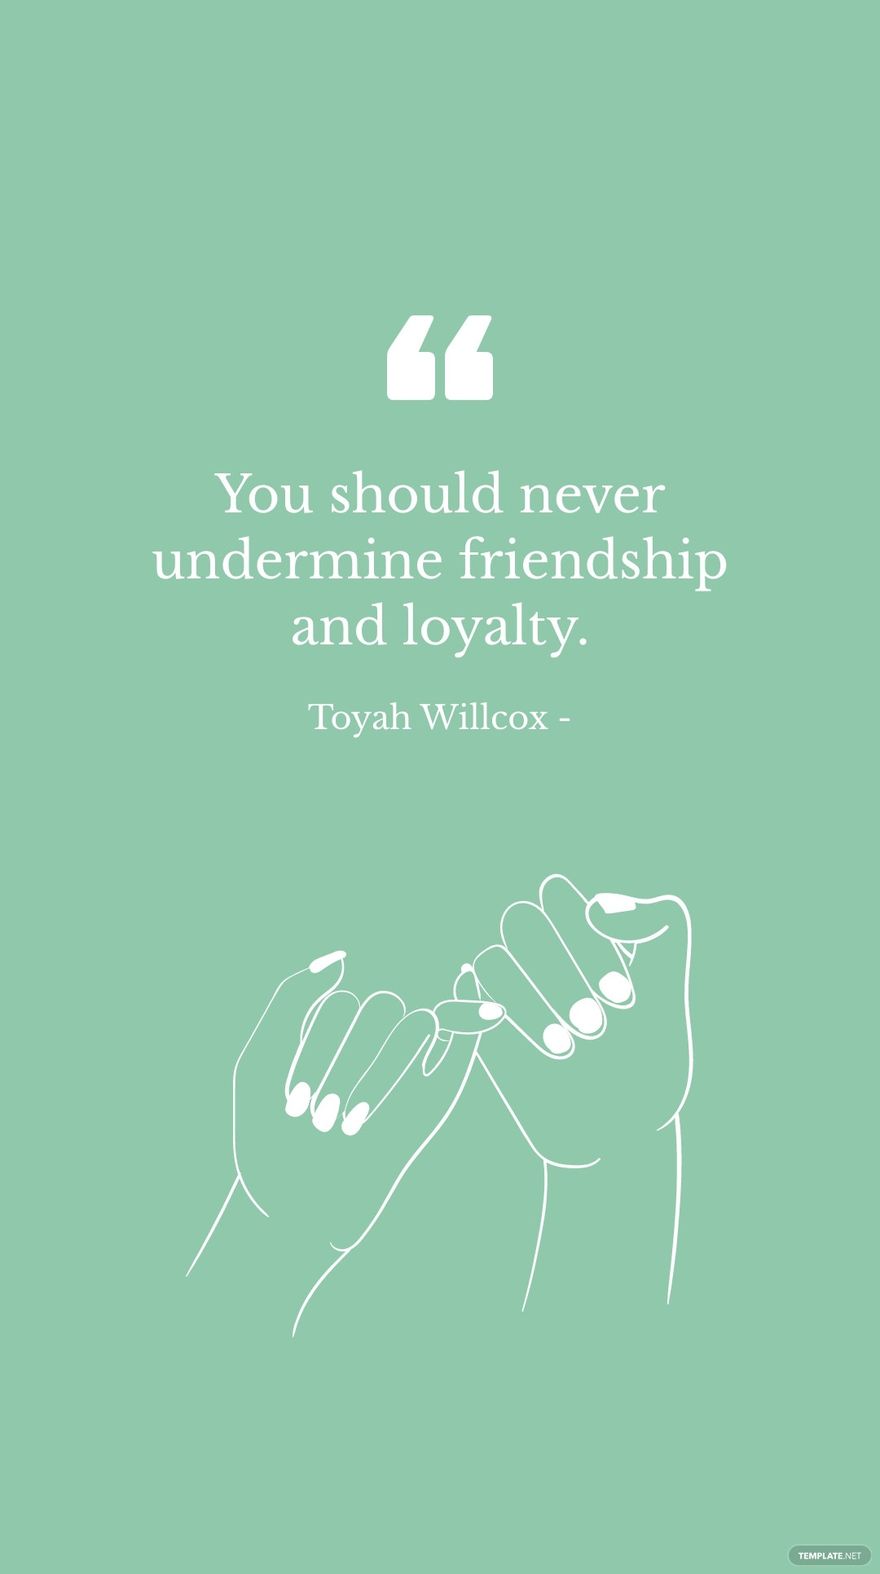 Toyah Willcox - You should never undermine friendship and loyalty.